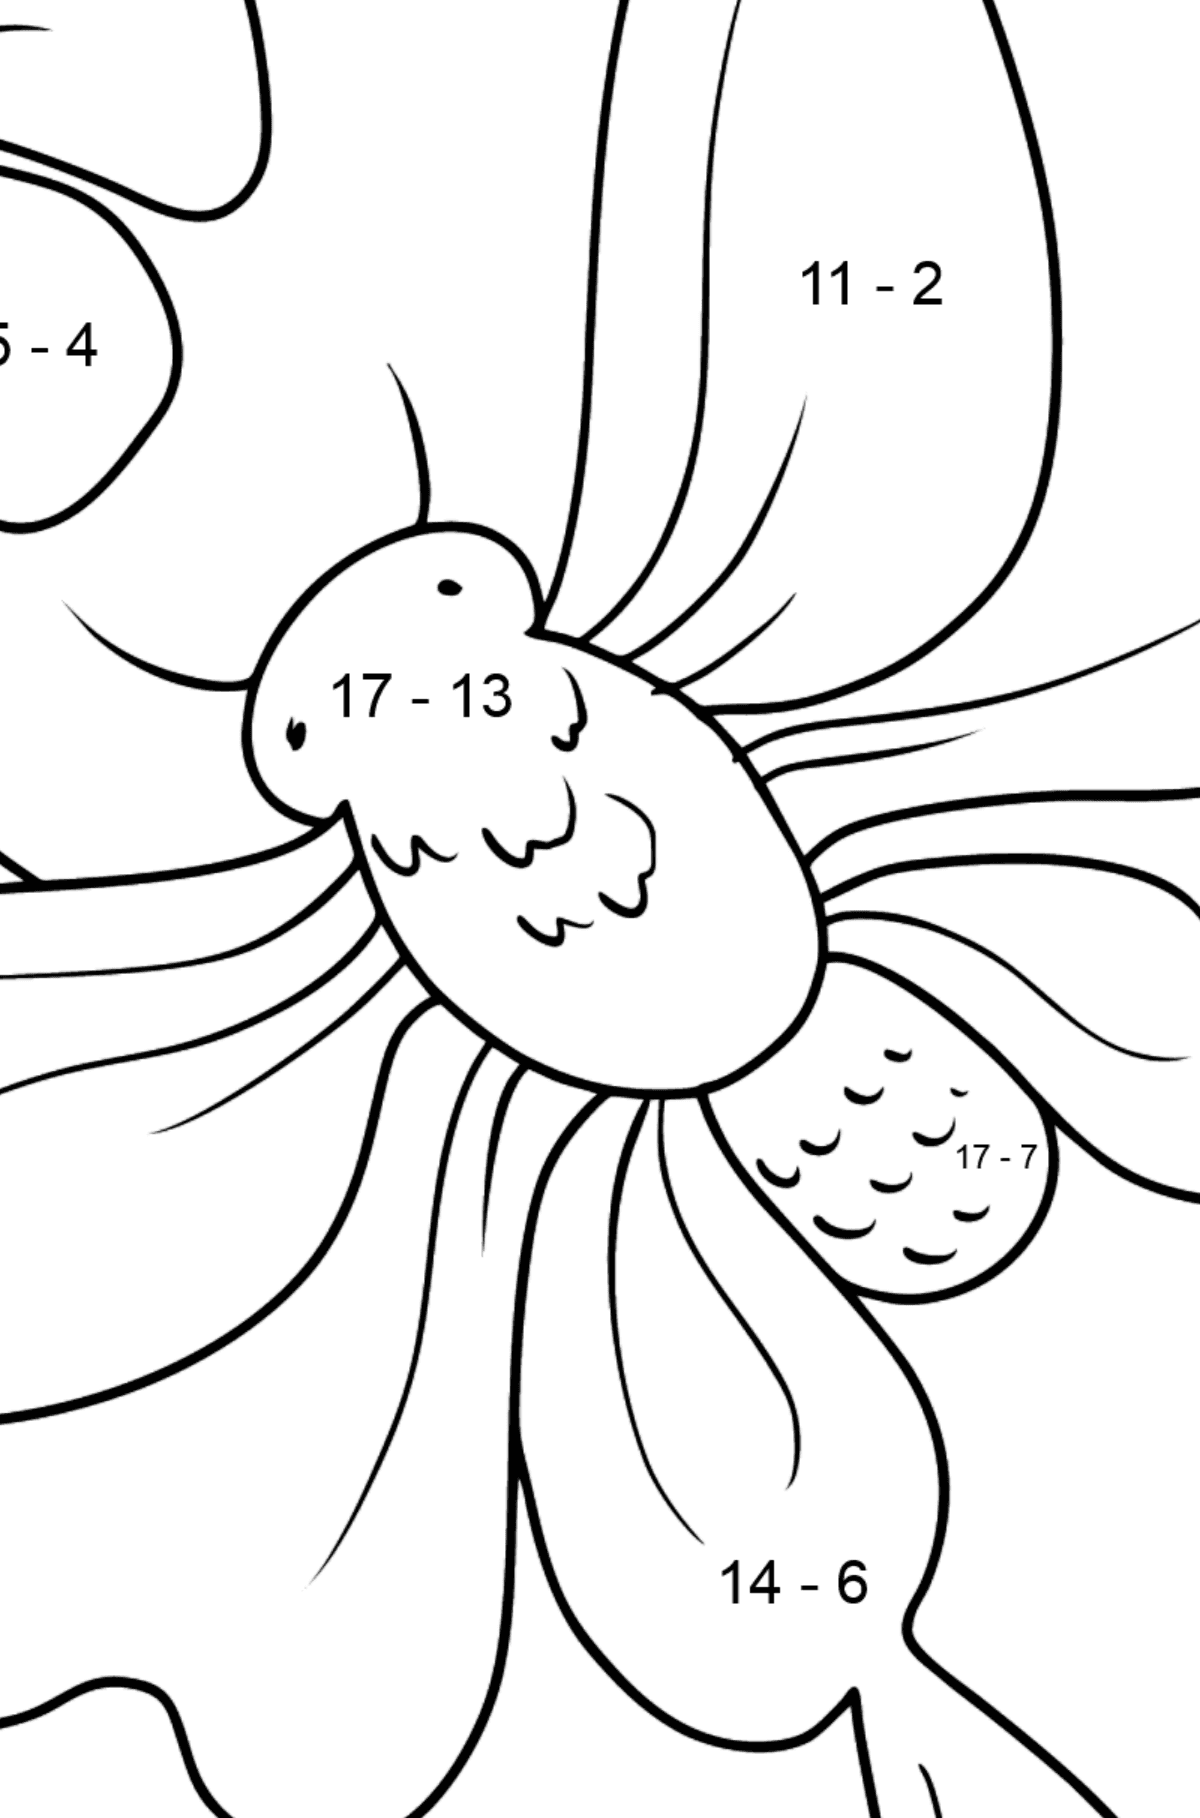 Butterfly on a Flower coloring page - Math Coloring - Subtraction for Kids